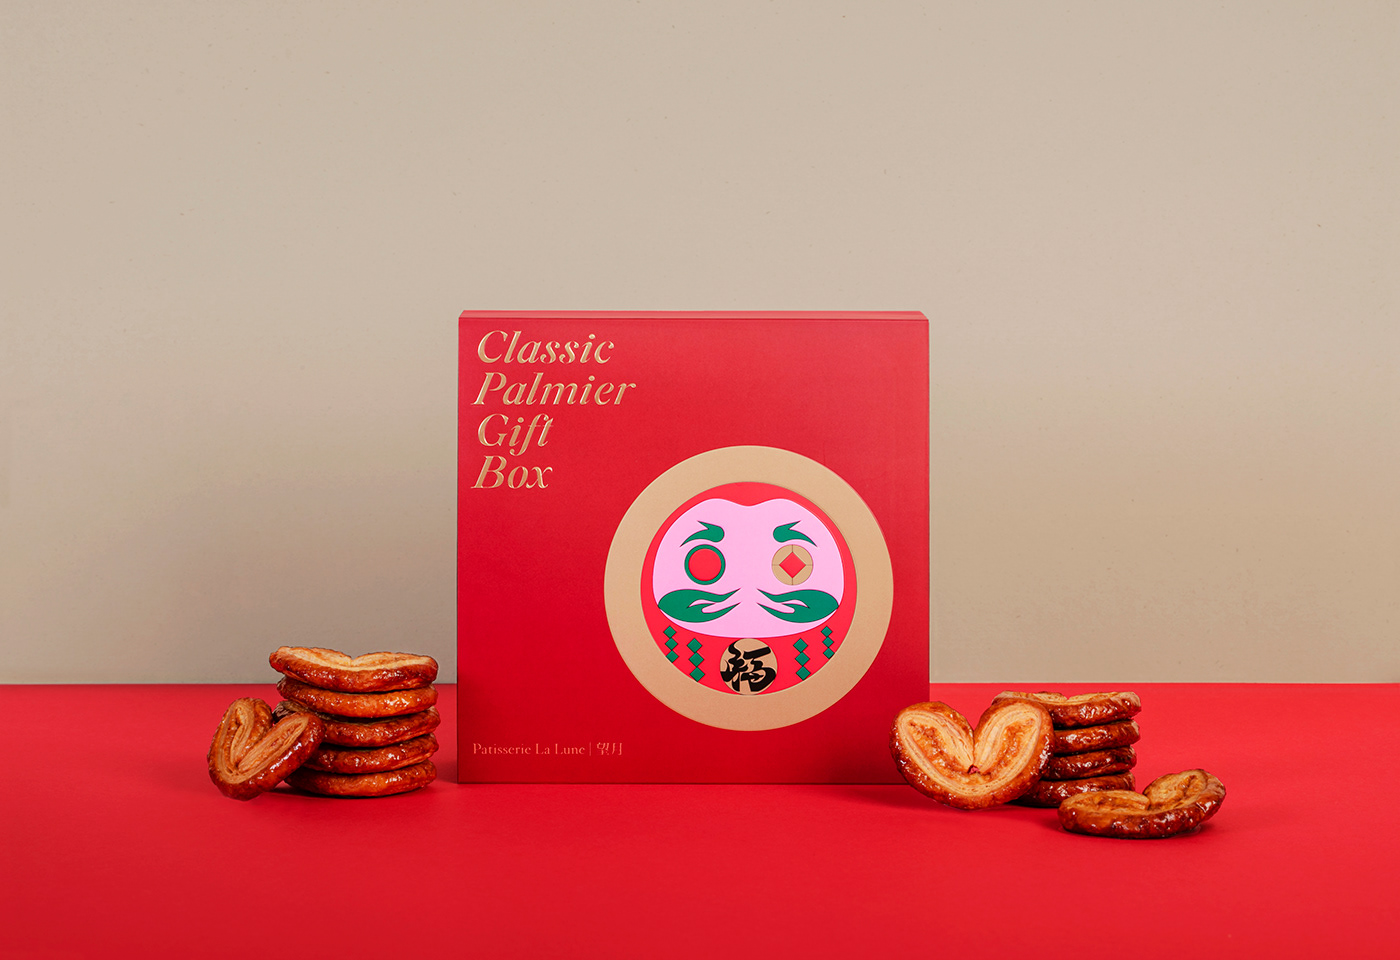 box design chinese new year cny festive packaging design Patisserie La Lune pengguin tiger 望月 達摩